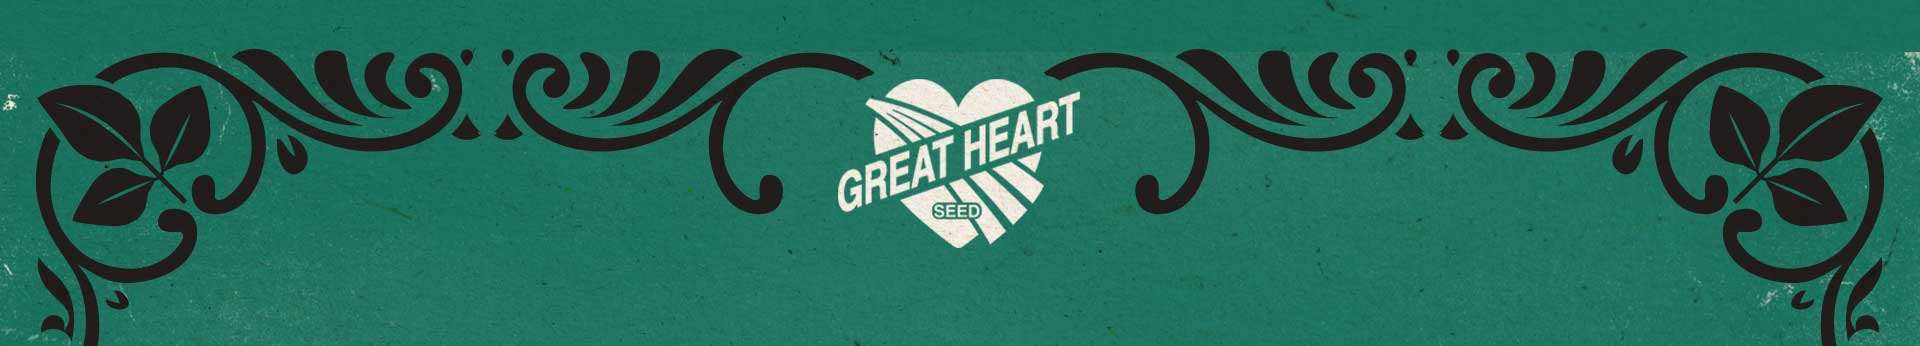 Great Heart Seed